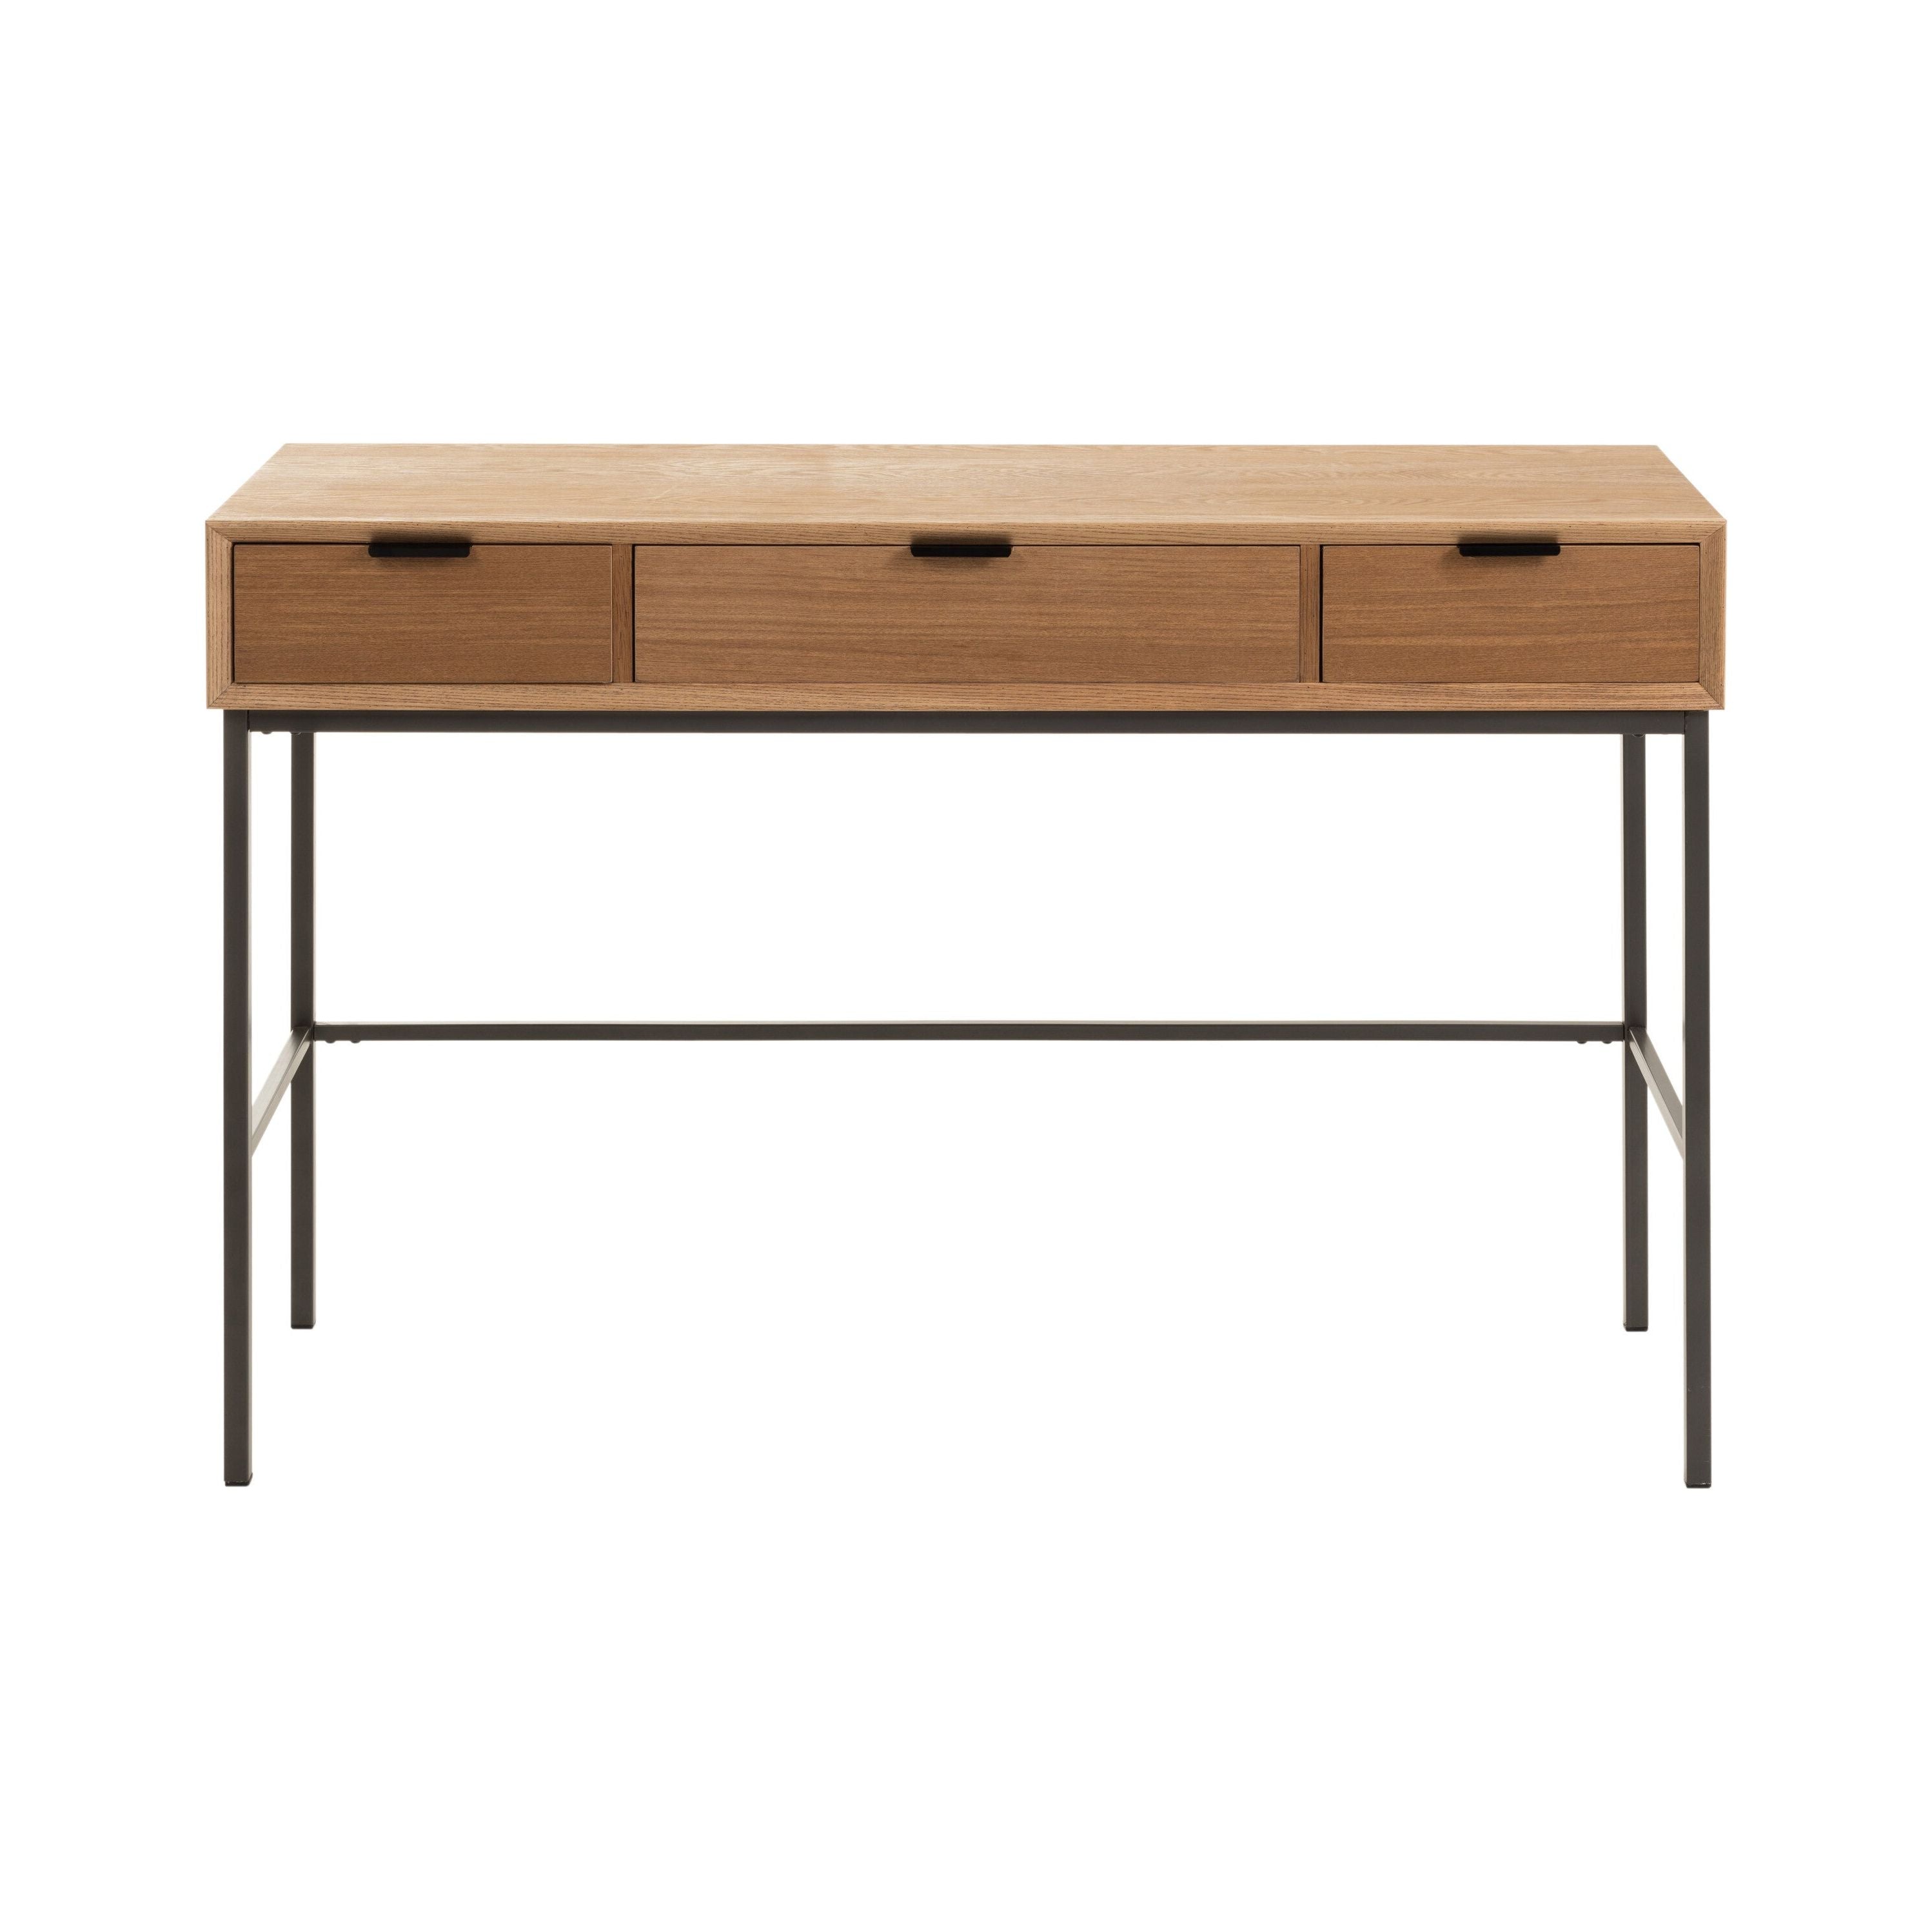 Console 3 Lades Hout/metaal Naturel